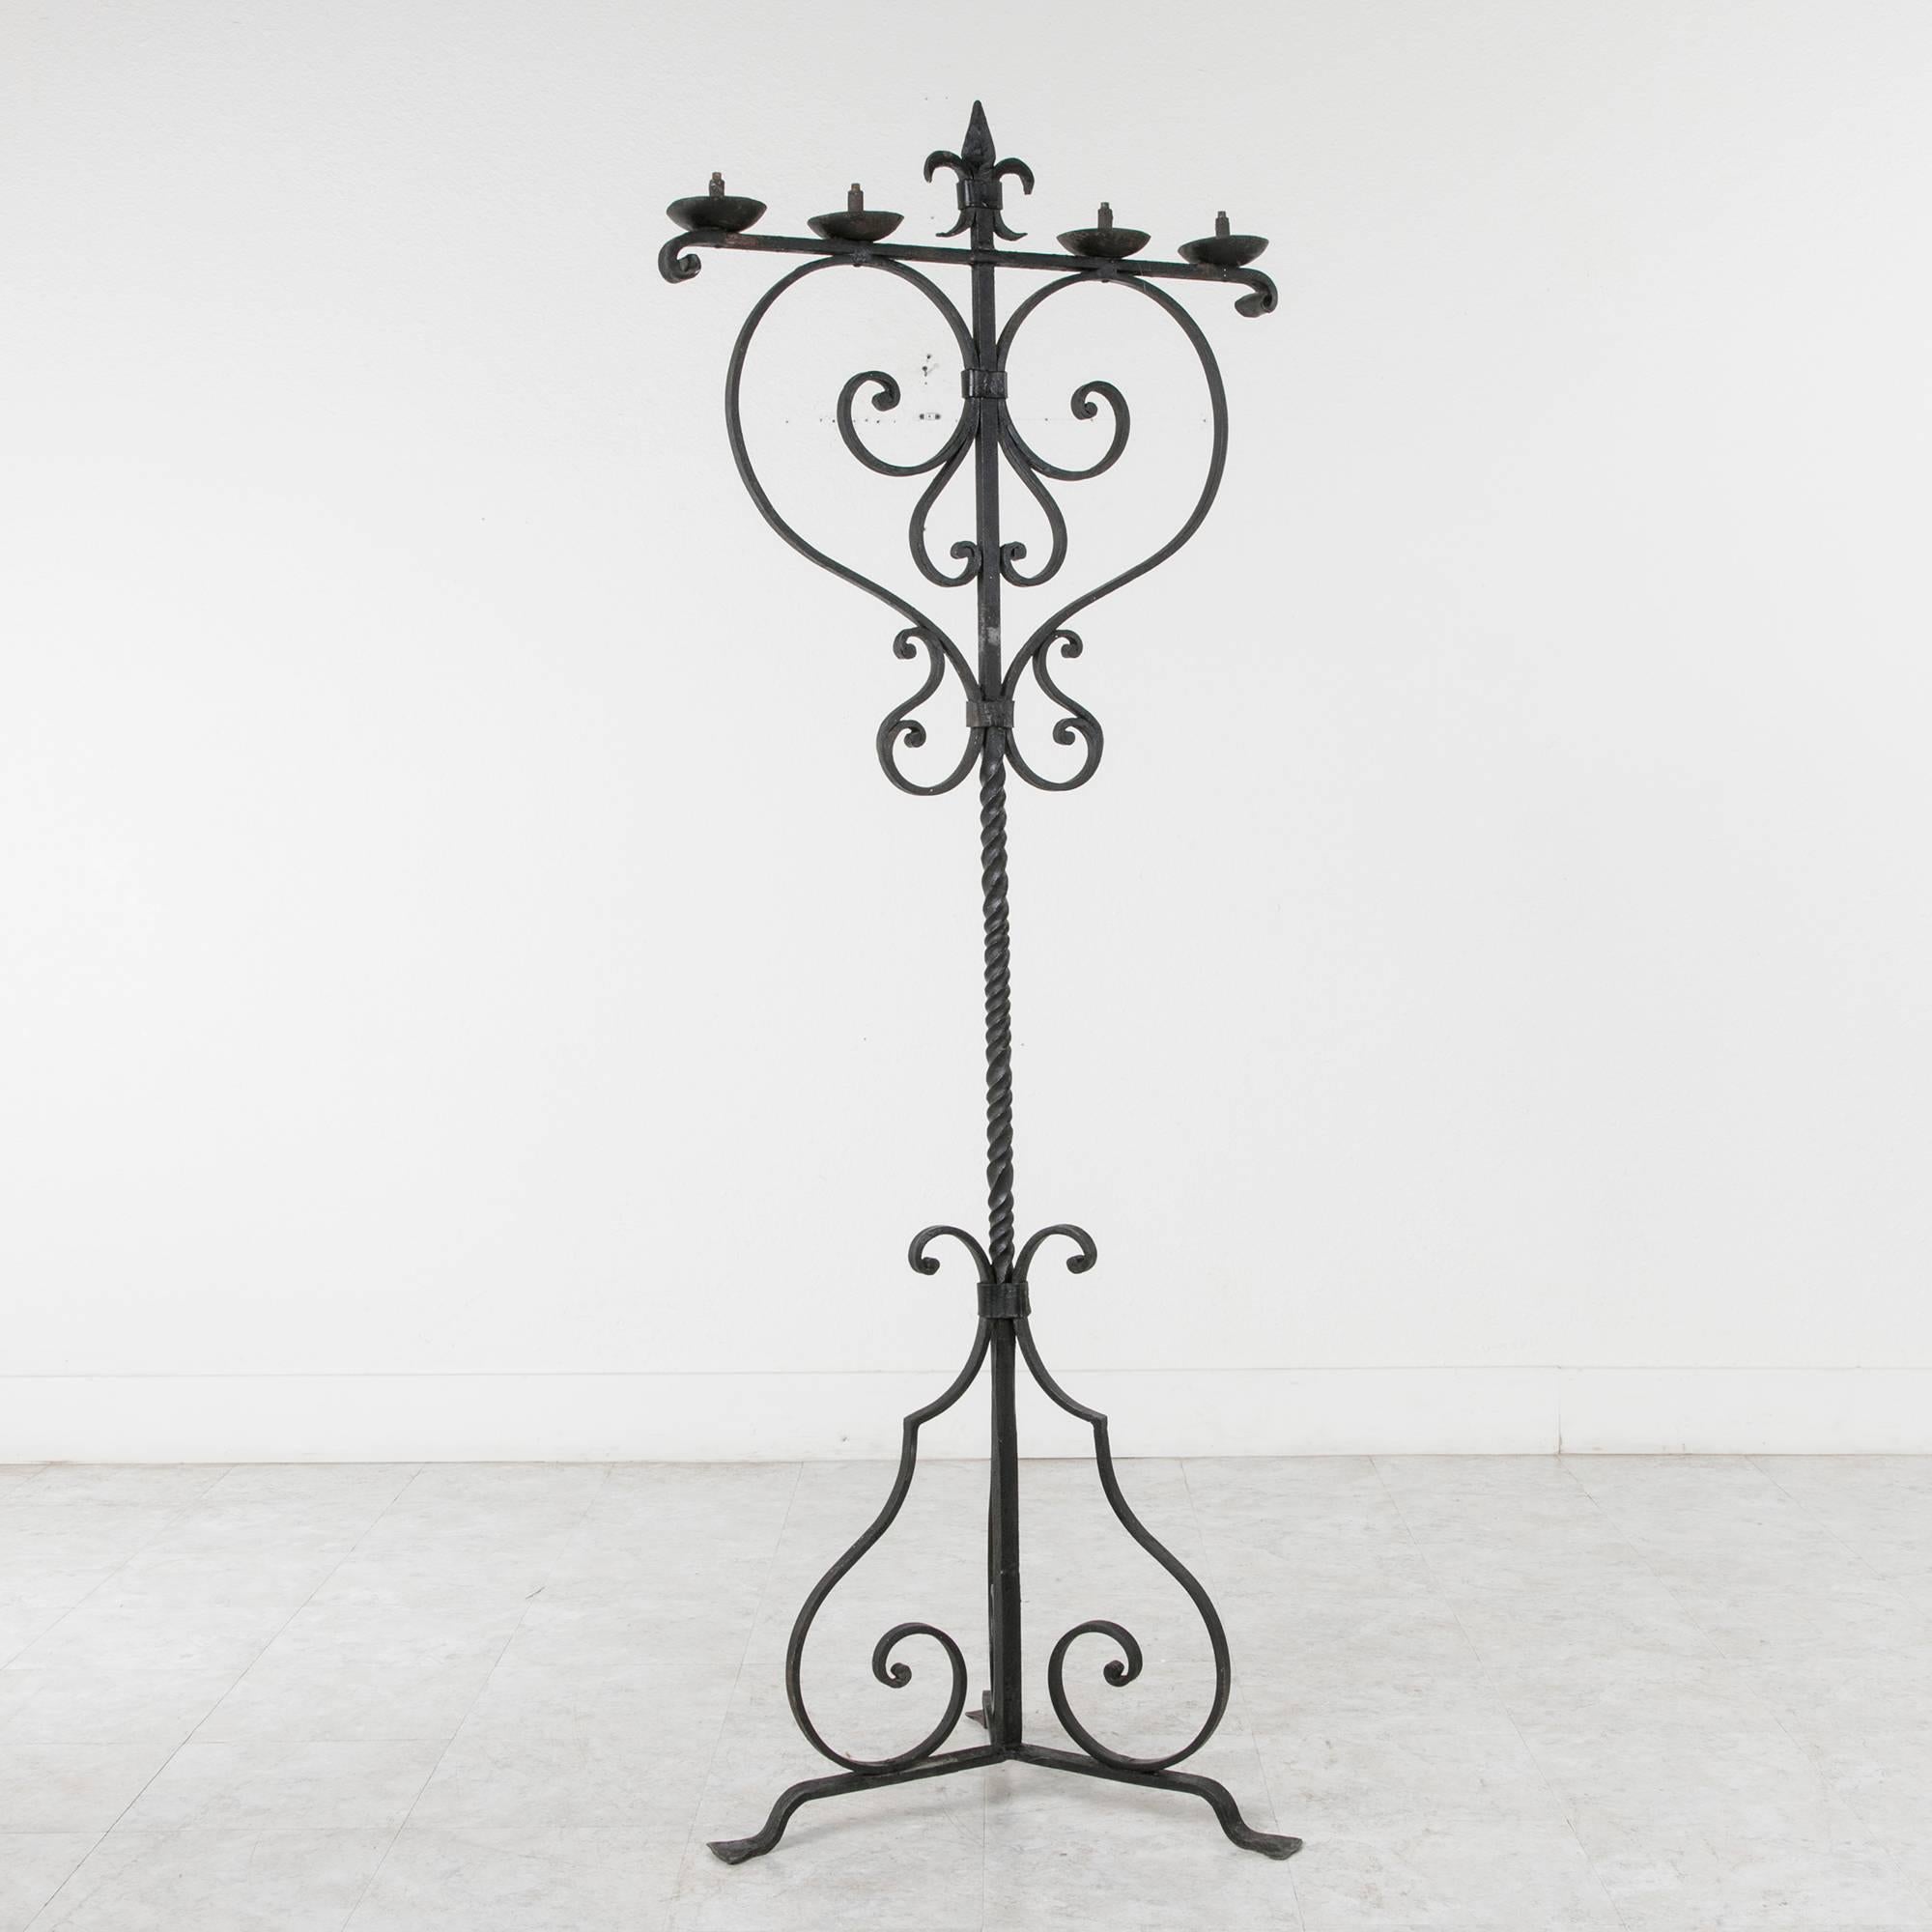 This early 20th century hand-forged iron torchere with fleur de lys accommodates four 3 inch diameter candles. The hand-forged iron tripod base with scrollwork supports a twisted iron stem that rises to a point created by the fleur de lys. This